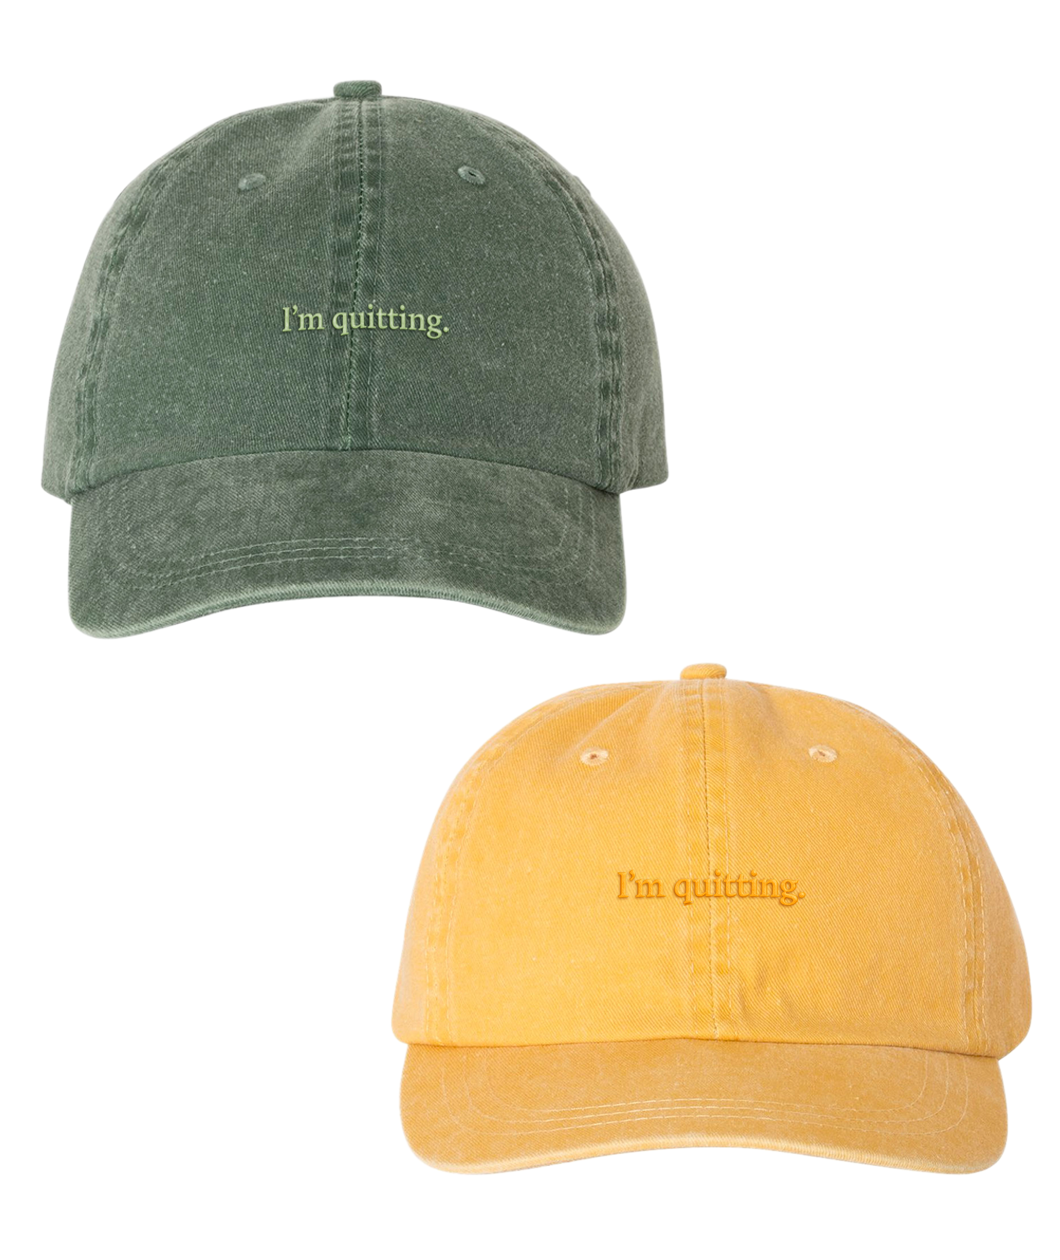 Green hat with “I’m qutting.” in green centered on front of hat. Yellow hat with “I’m quitting” in orange centered on front of hat - from Iz Harris